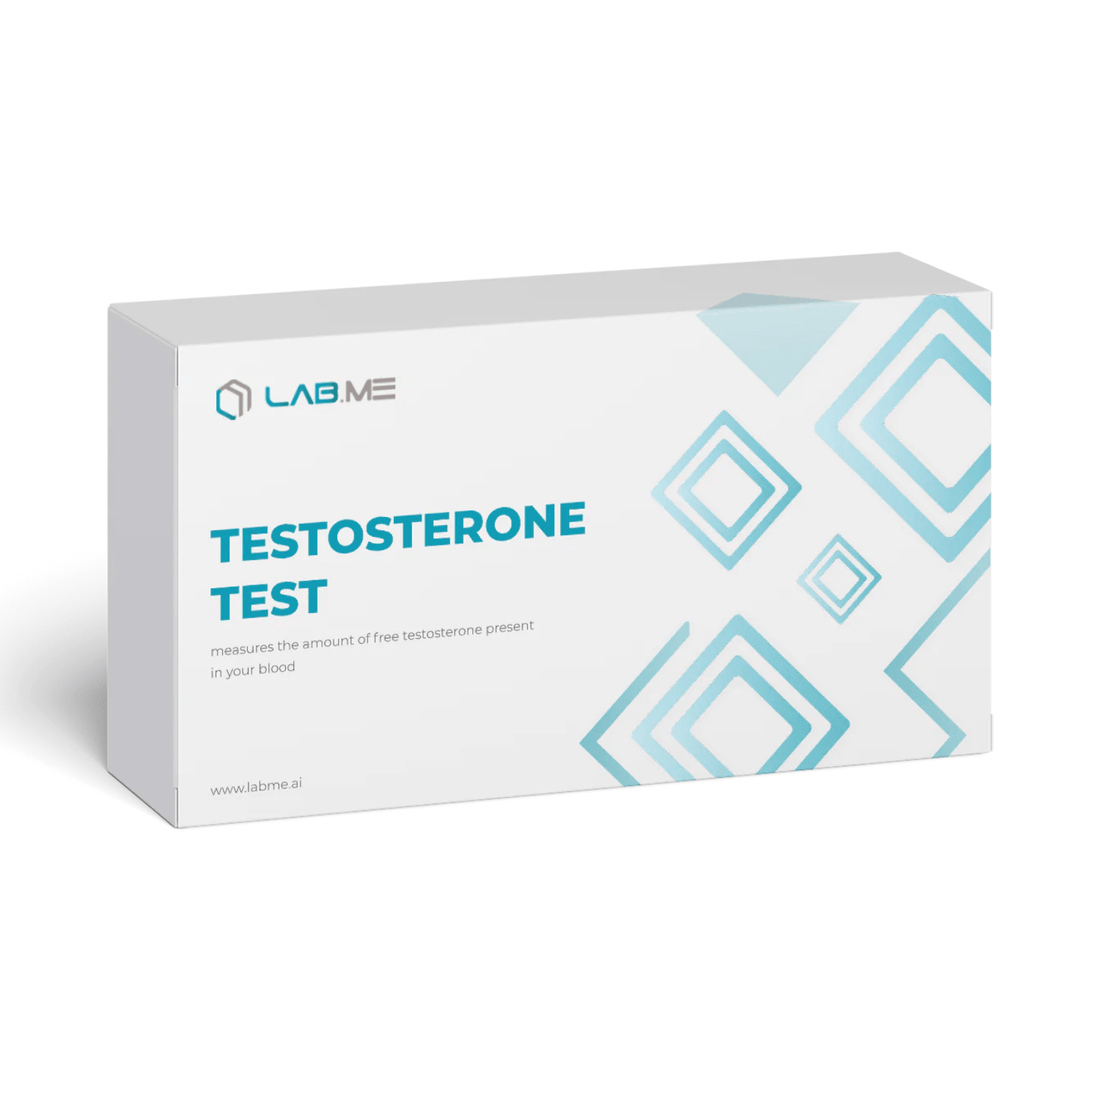 Lab Me - Testosterone At - Home Test - service